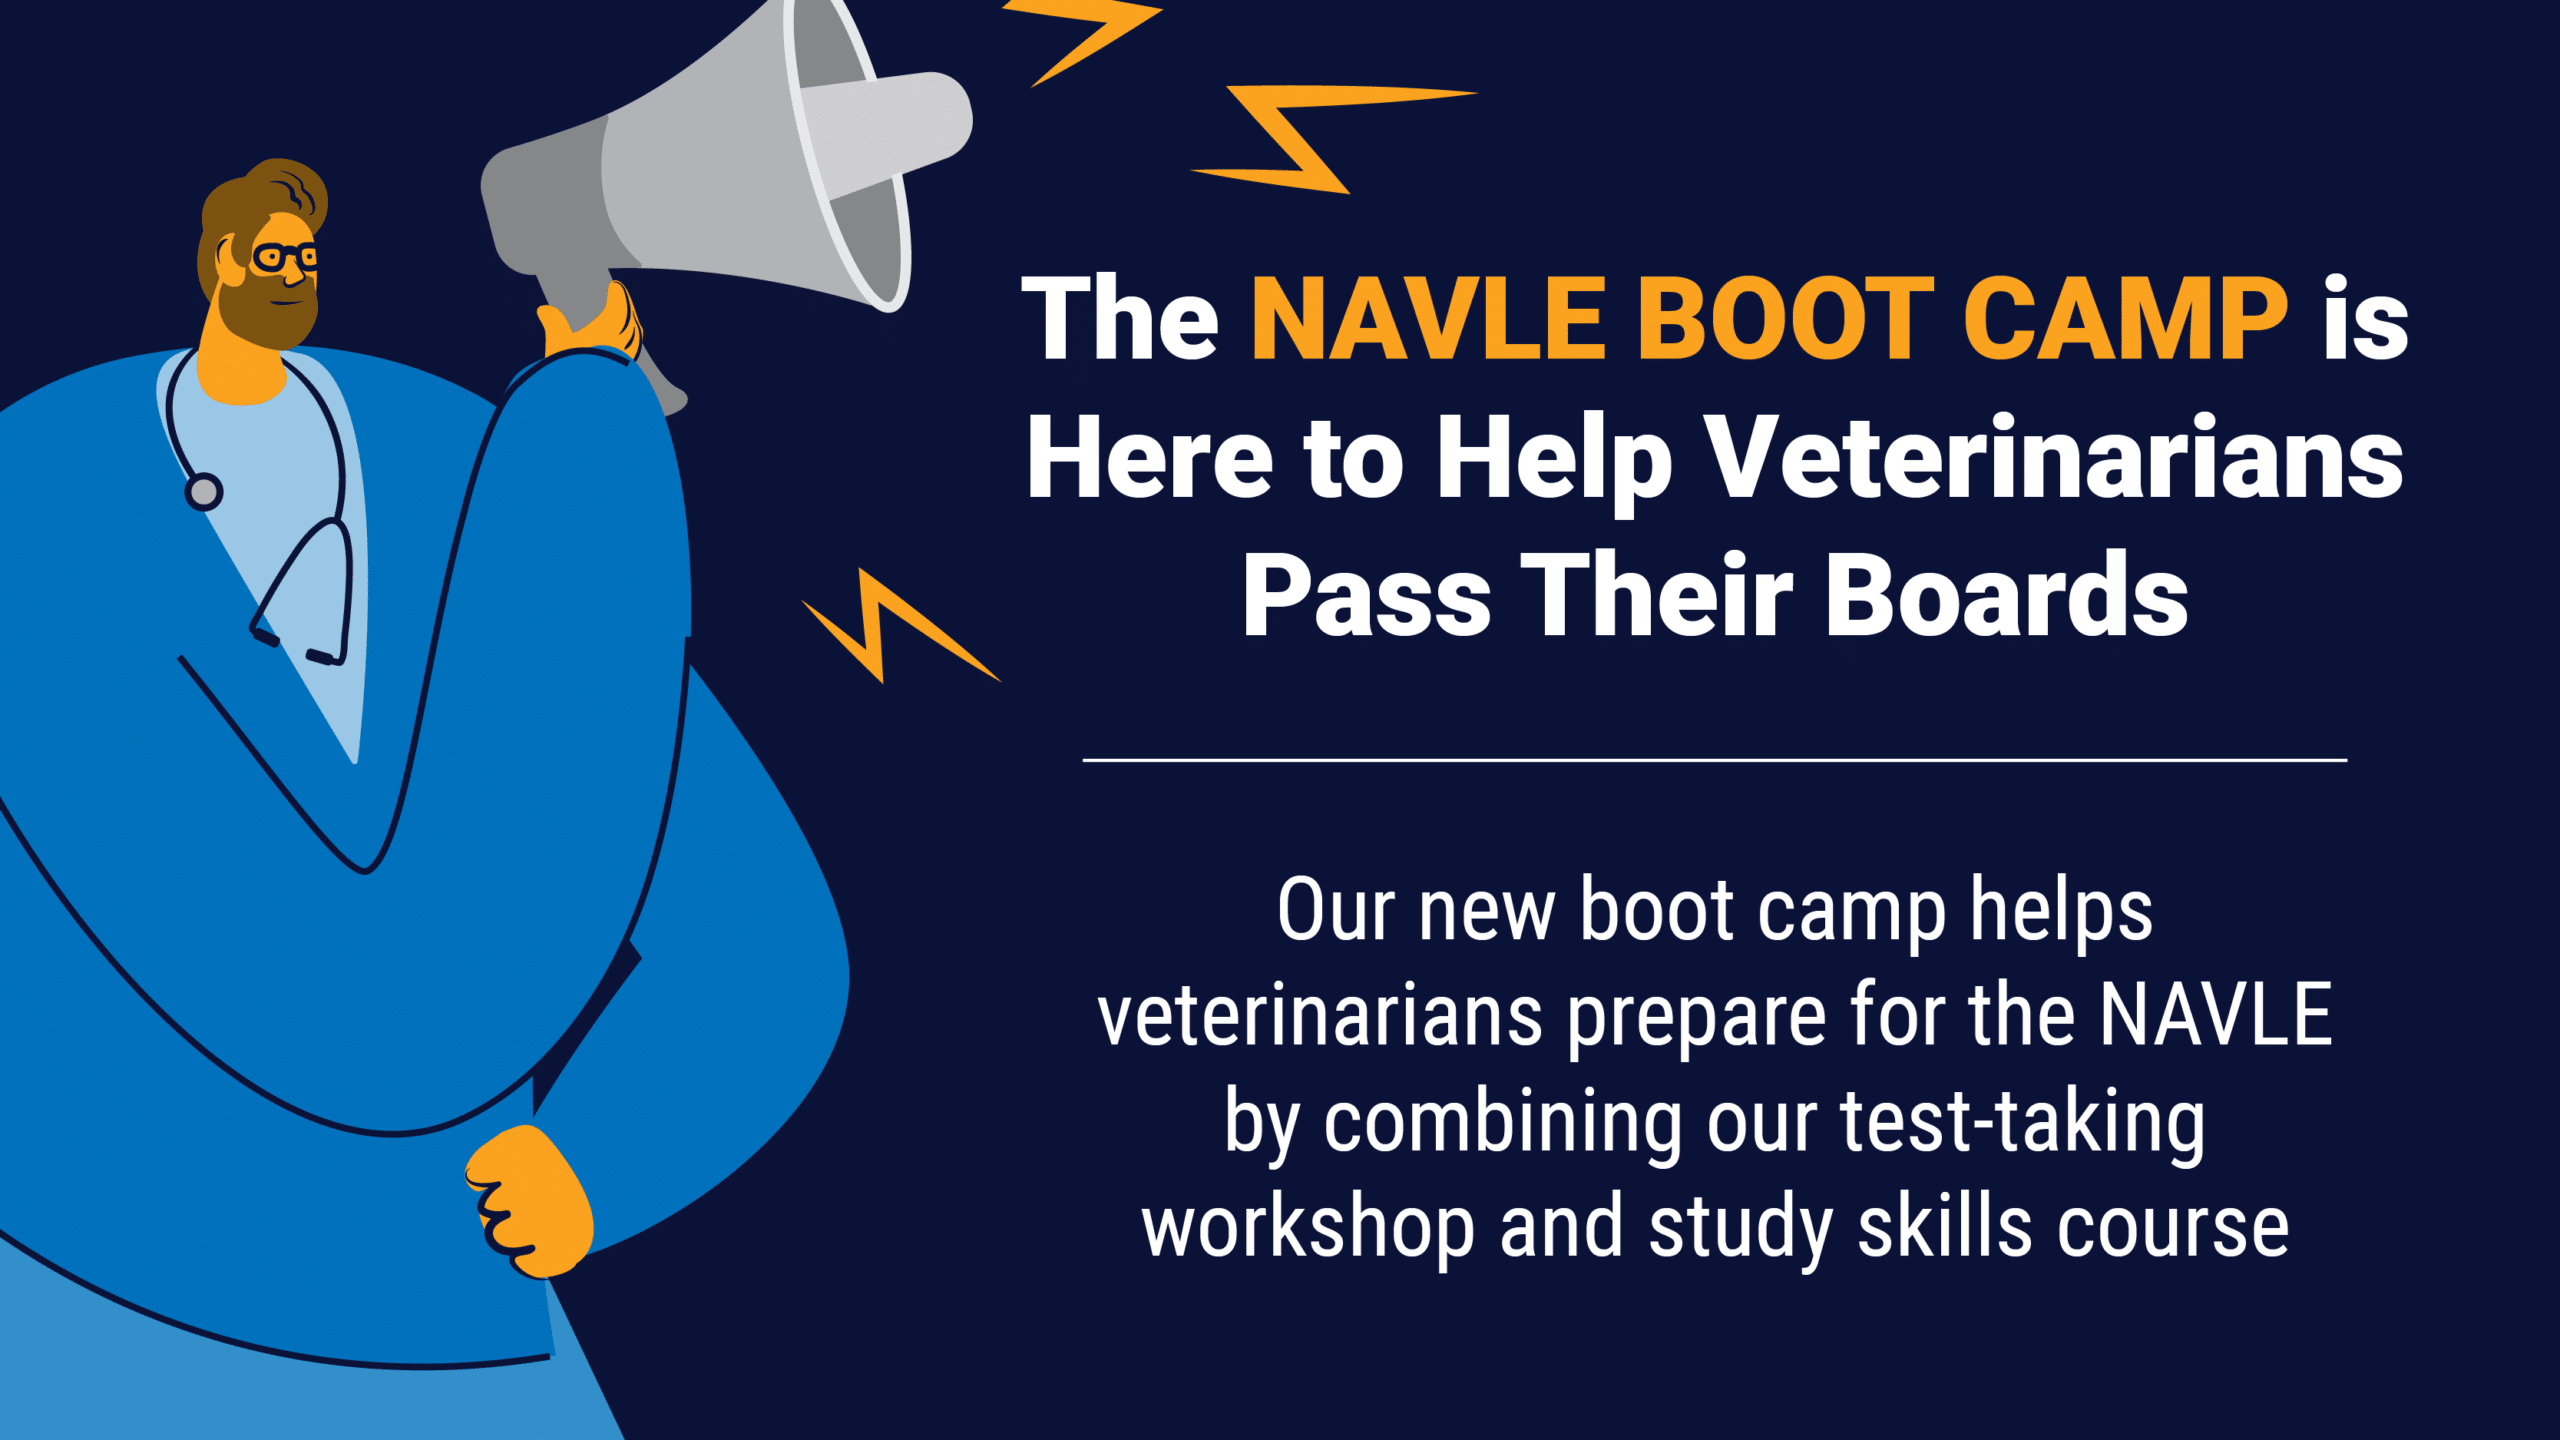 Featured image for “The NAVLE BOOT CAMP is Here to Help Veterinarians Pass Their Boards”